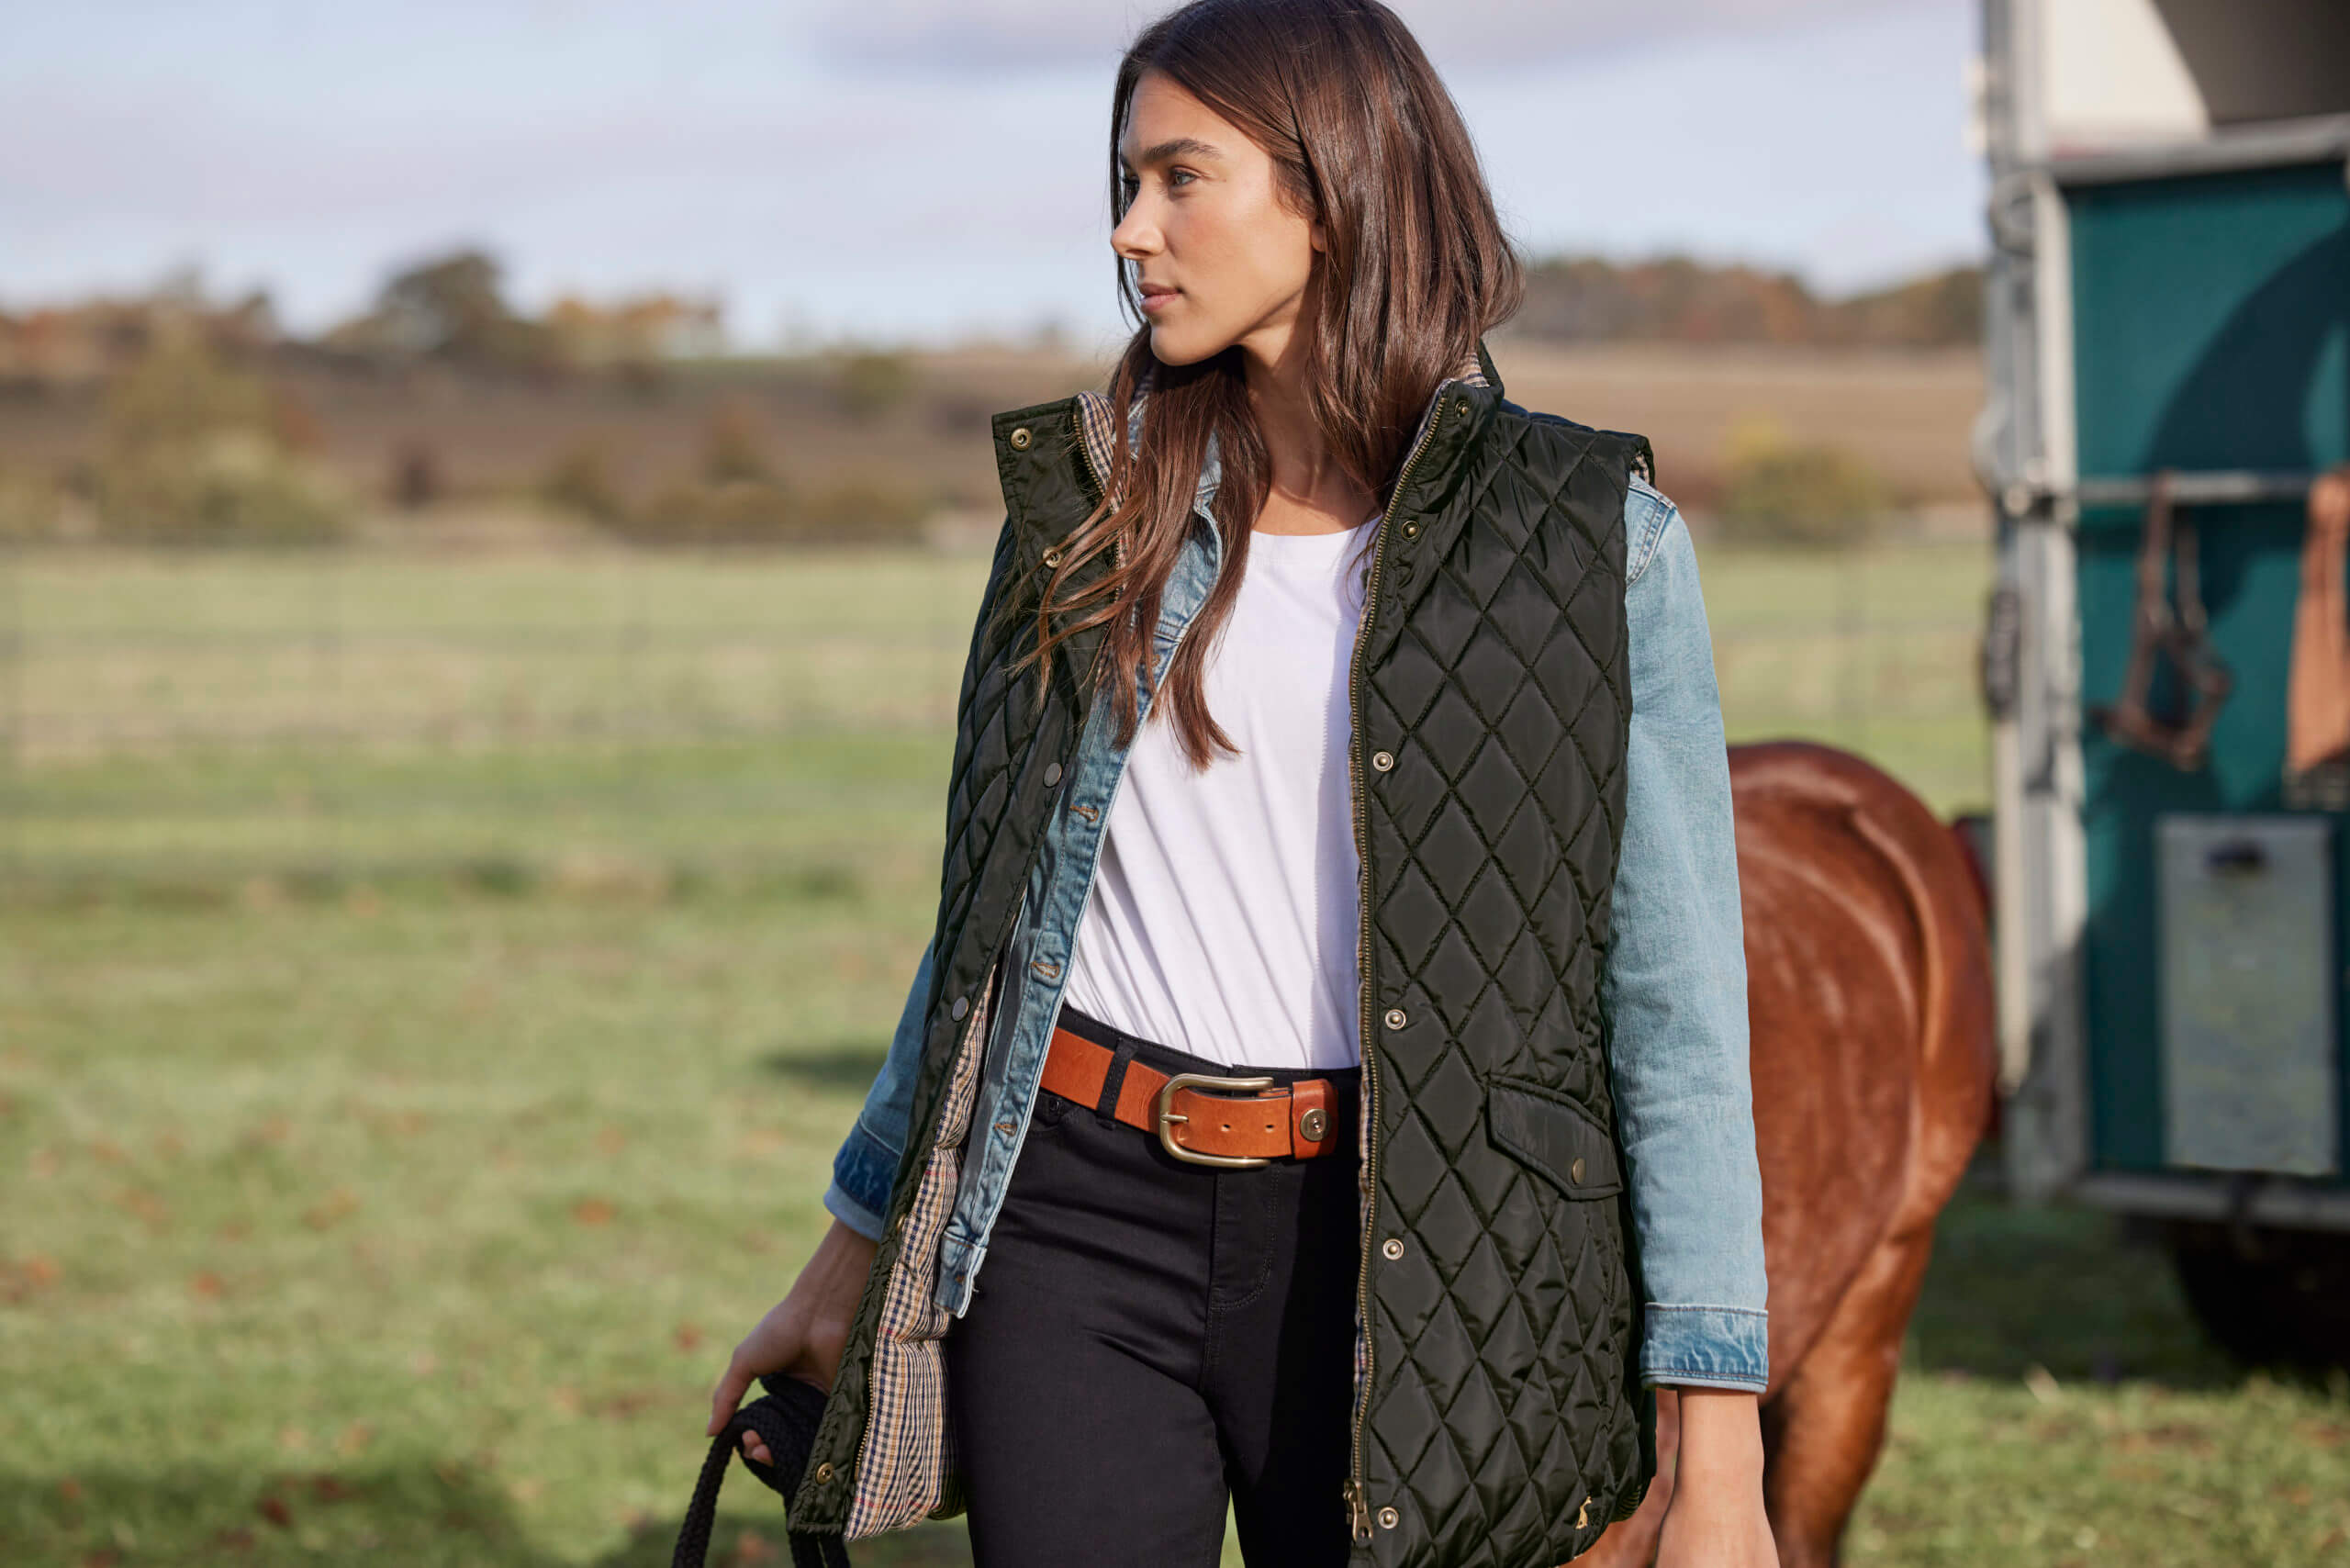 How to Wear a Gilet | How to Style a Gilet | Joules Journal